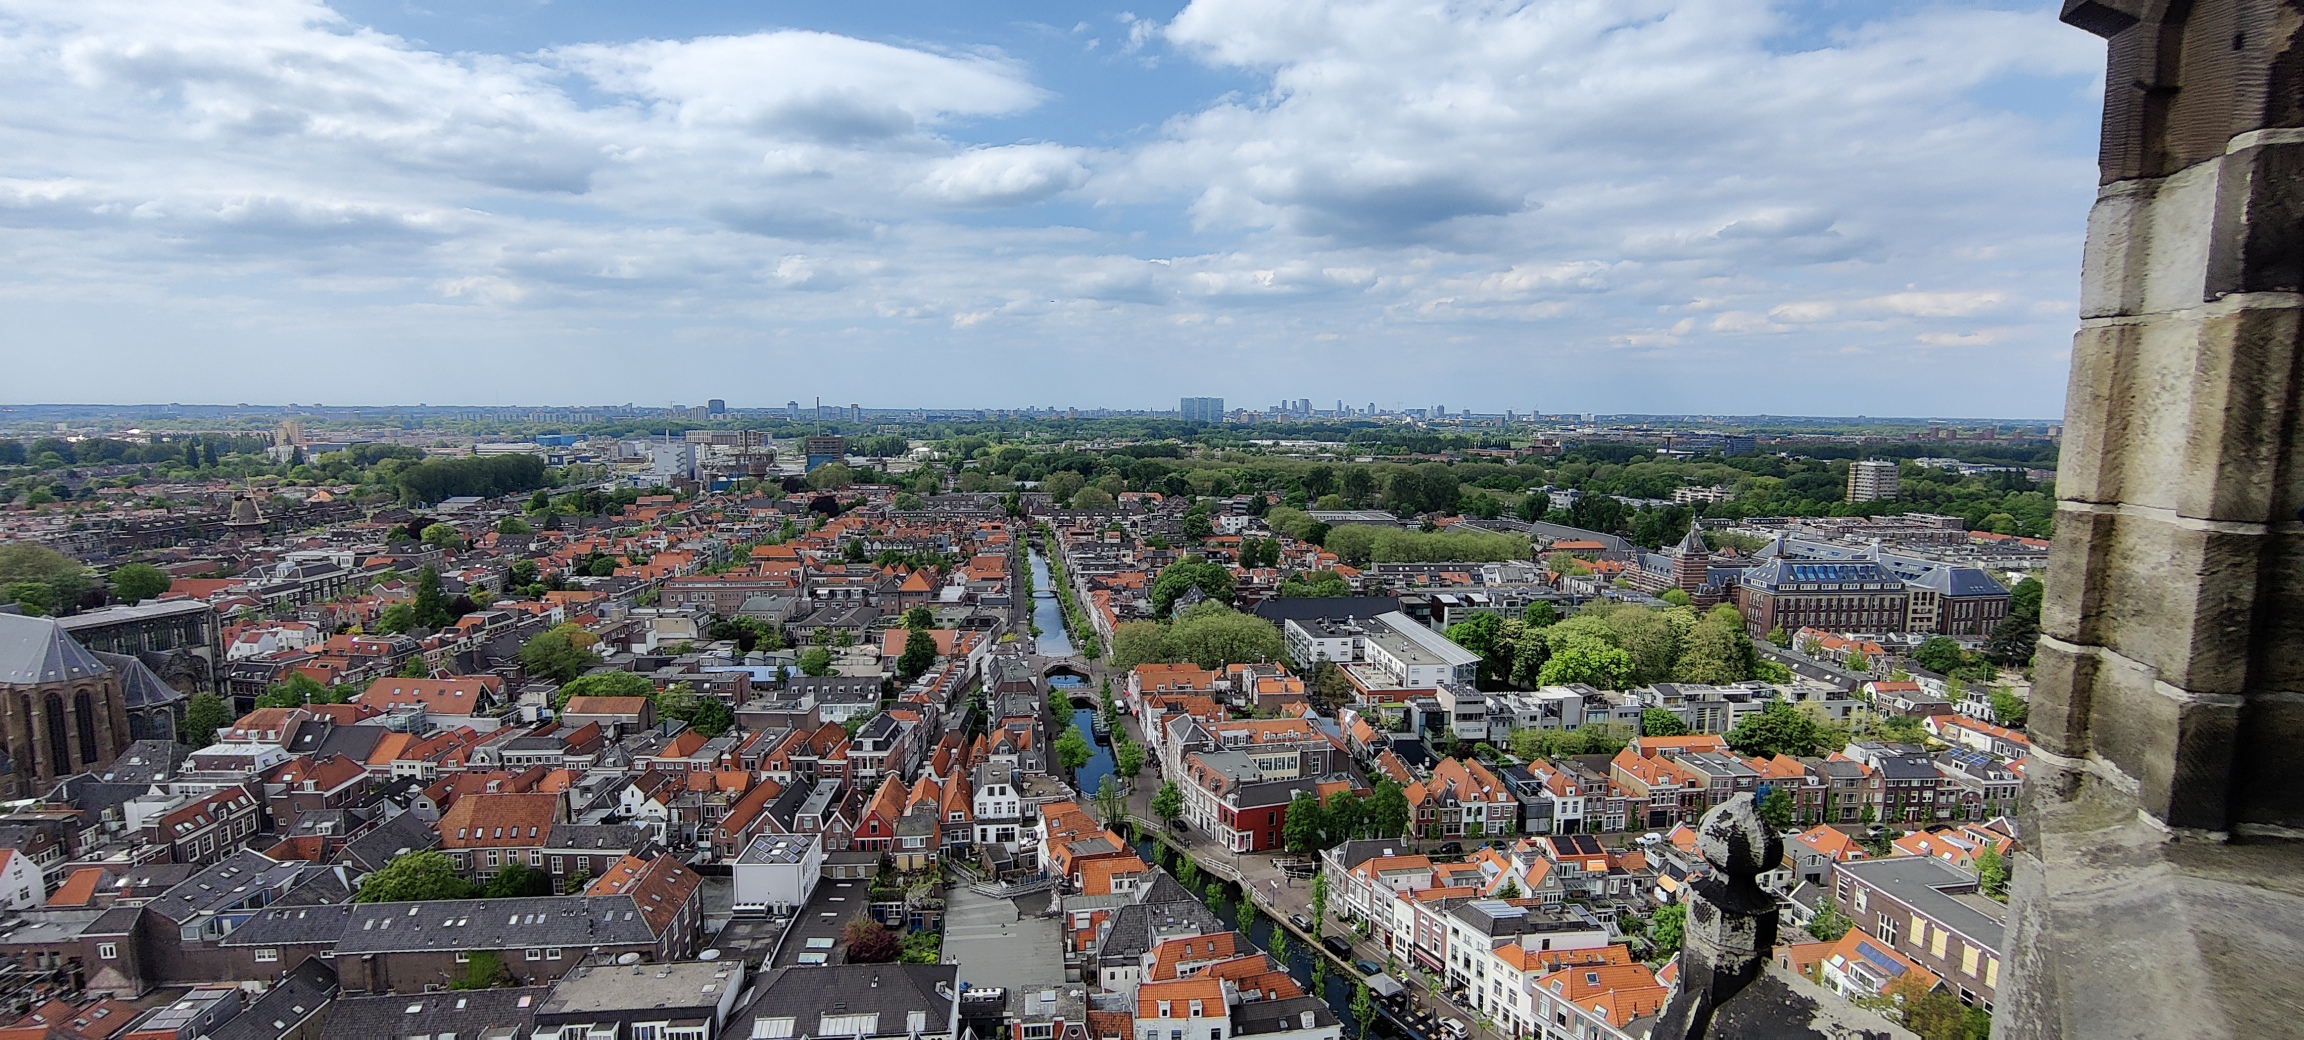 View over Delft all the way to The Hague